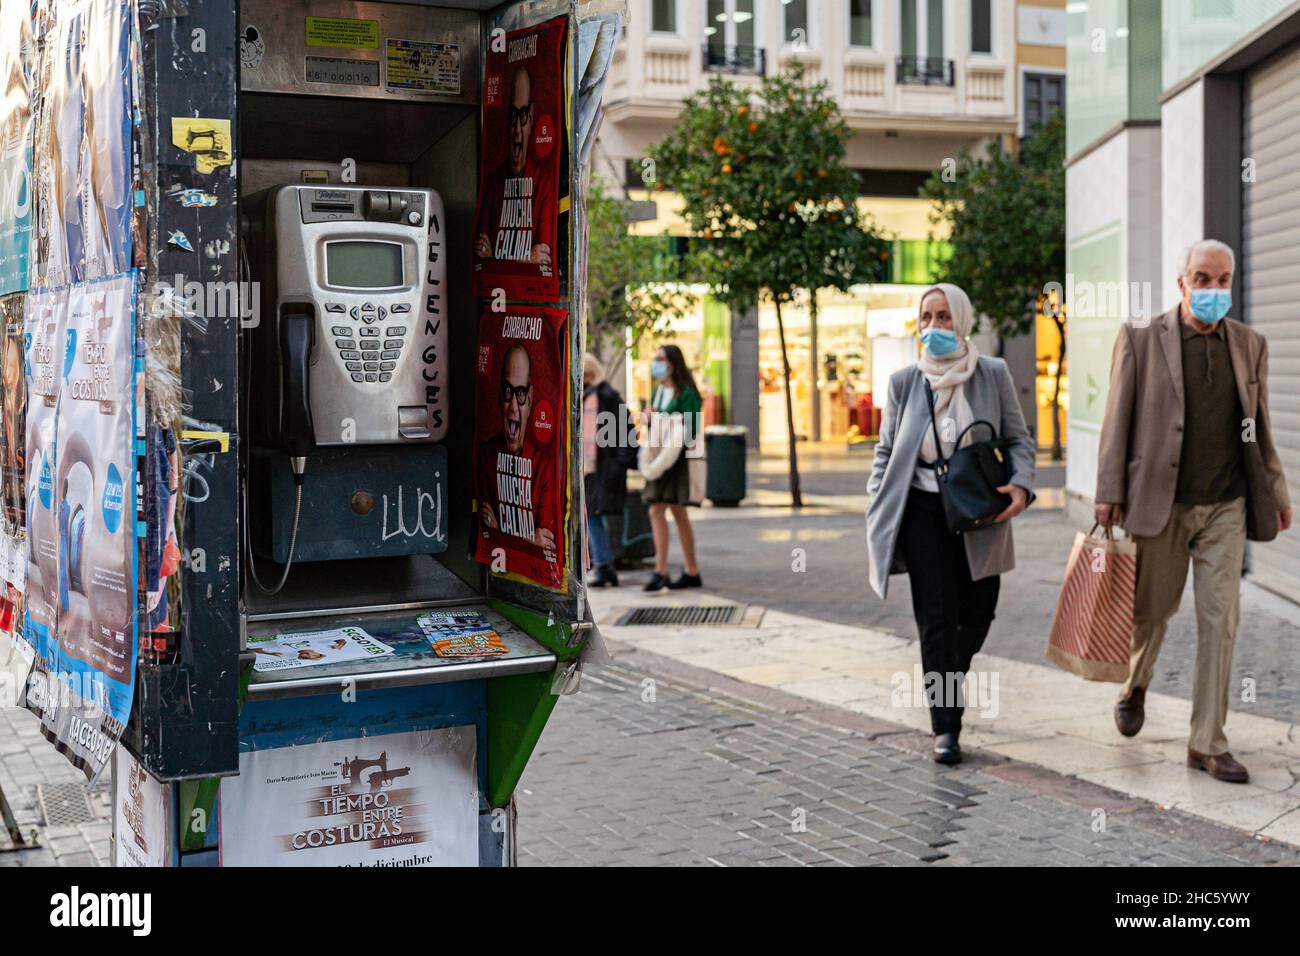 People with masks pass a phone booth in Valencia. According to the new General Telecommunications Law (LGT), phone booths will disappear in 2022. The appearance of the mobile phone has been the main cause of the disuse of these booths. (Photo by Xisco Navarro / SOPA Images/Sipa USA) Stock Photo